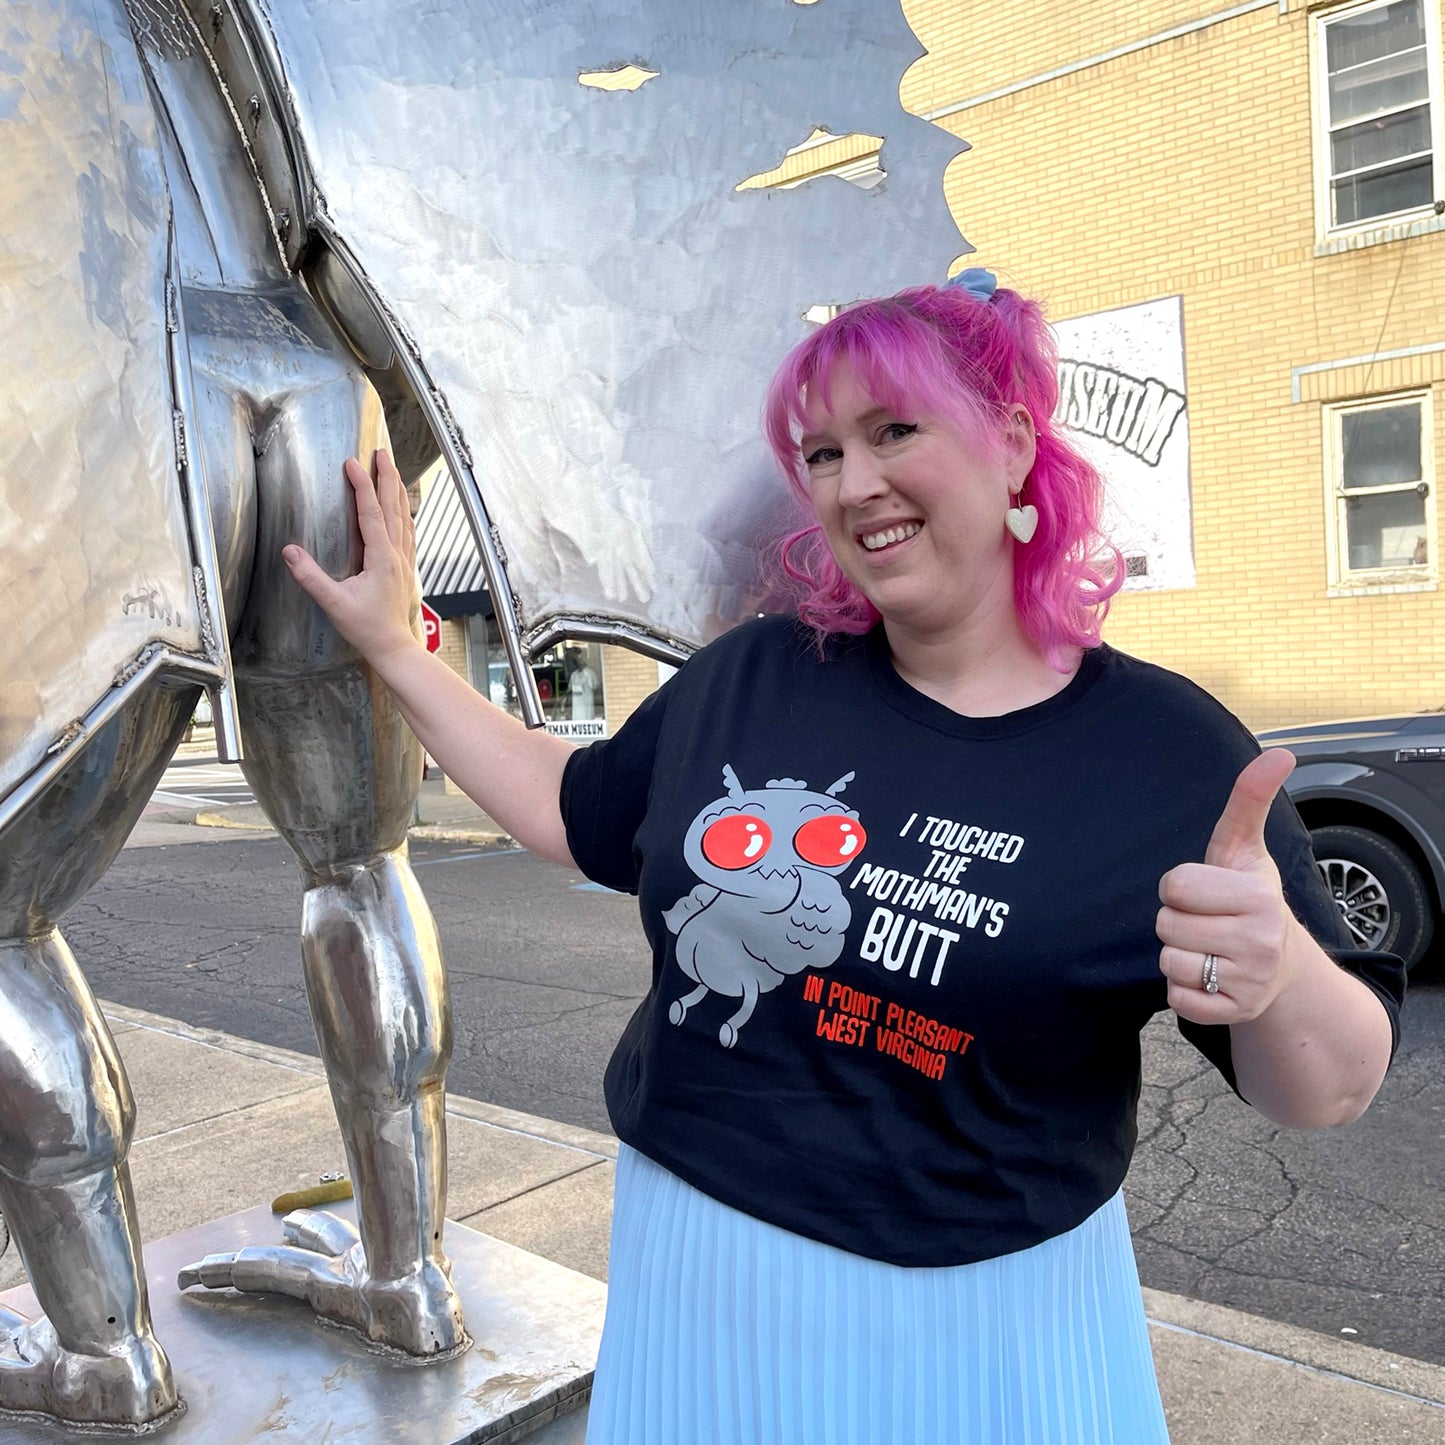 "I Touched the Mothman's Butt" T-shirt